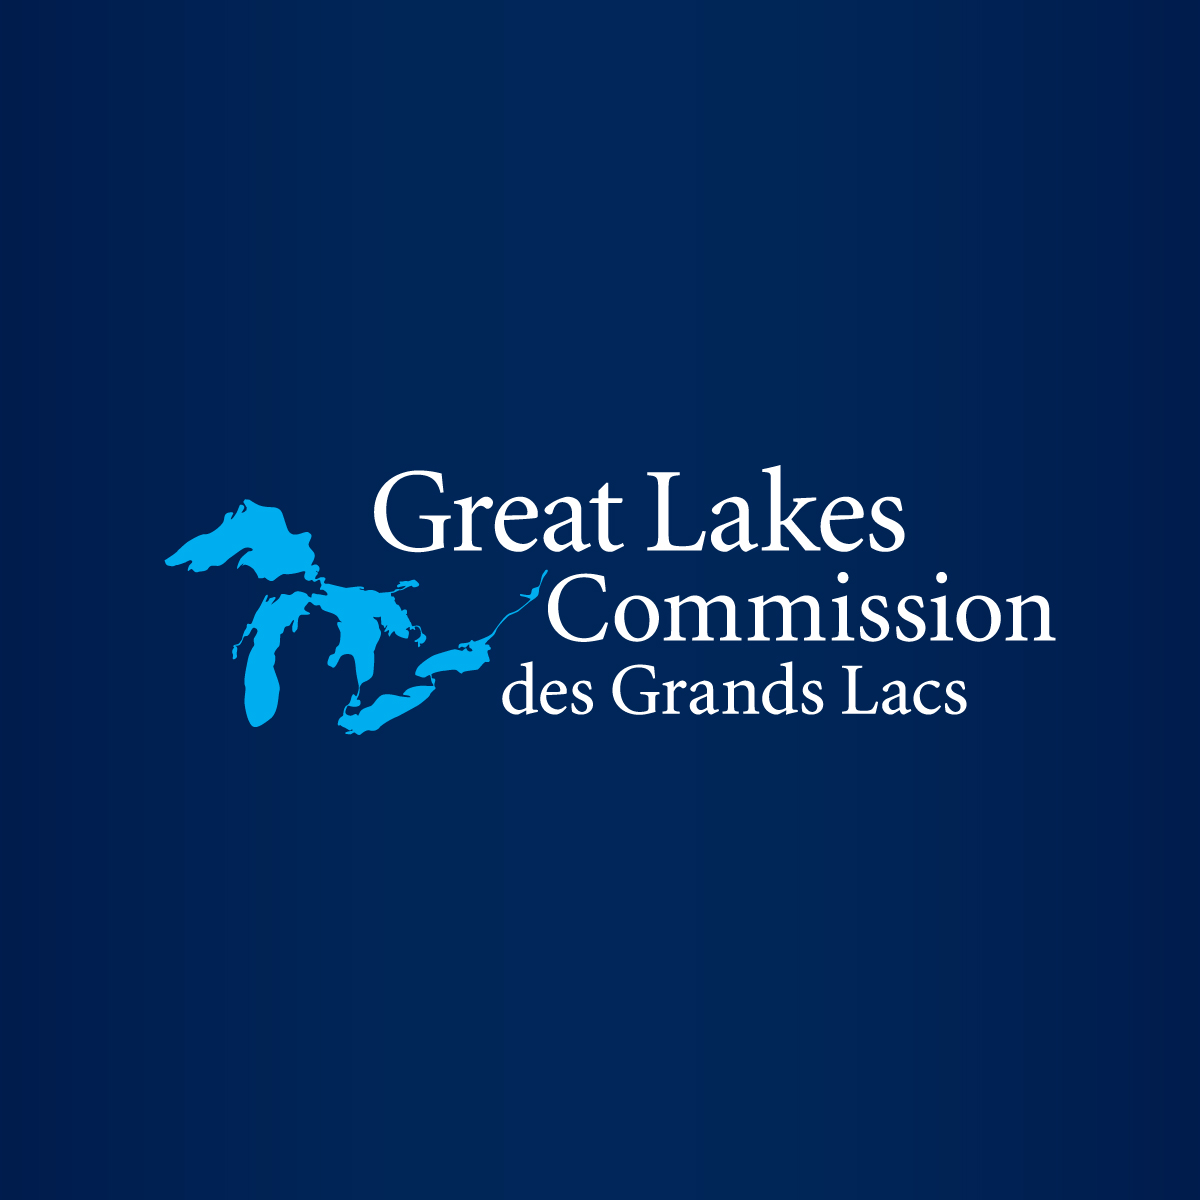 Conservation groups want to intervene in state, tribal treaty negotiations over Great Lakes fishing